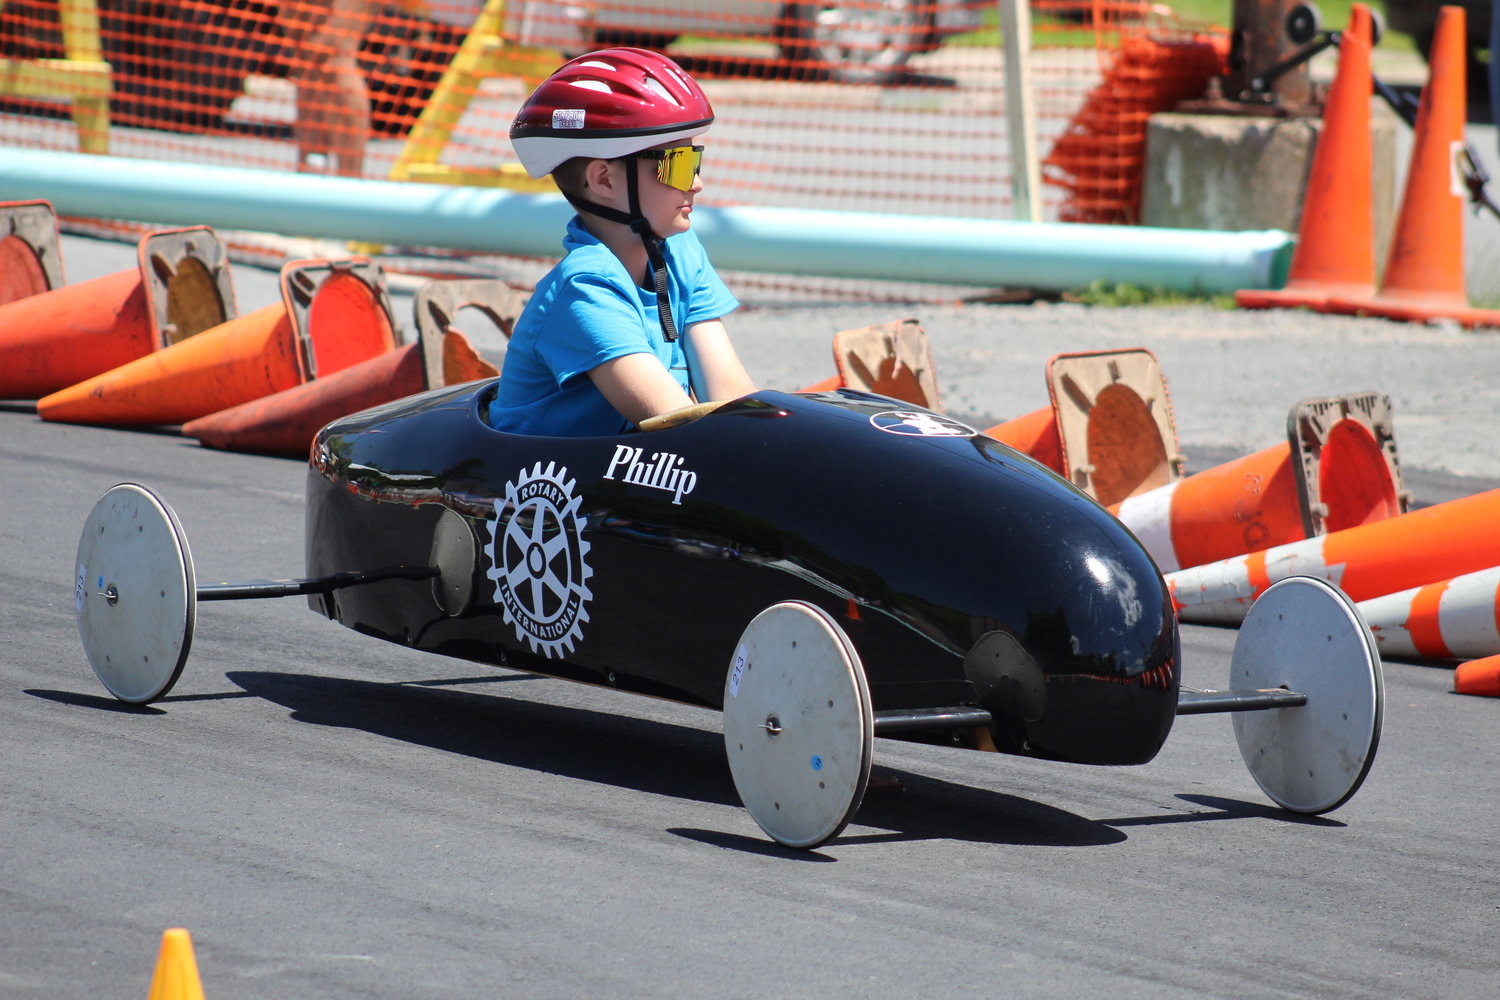 Phillip Kolarik competed in the day’s races driving for Liberty Rotary.